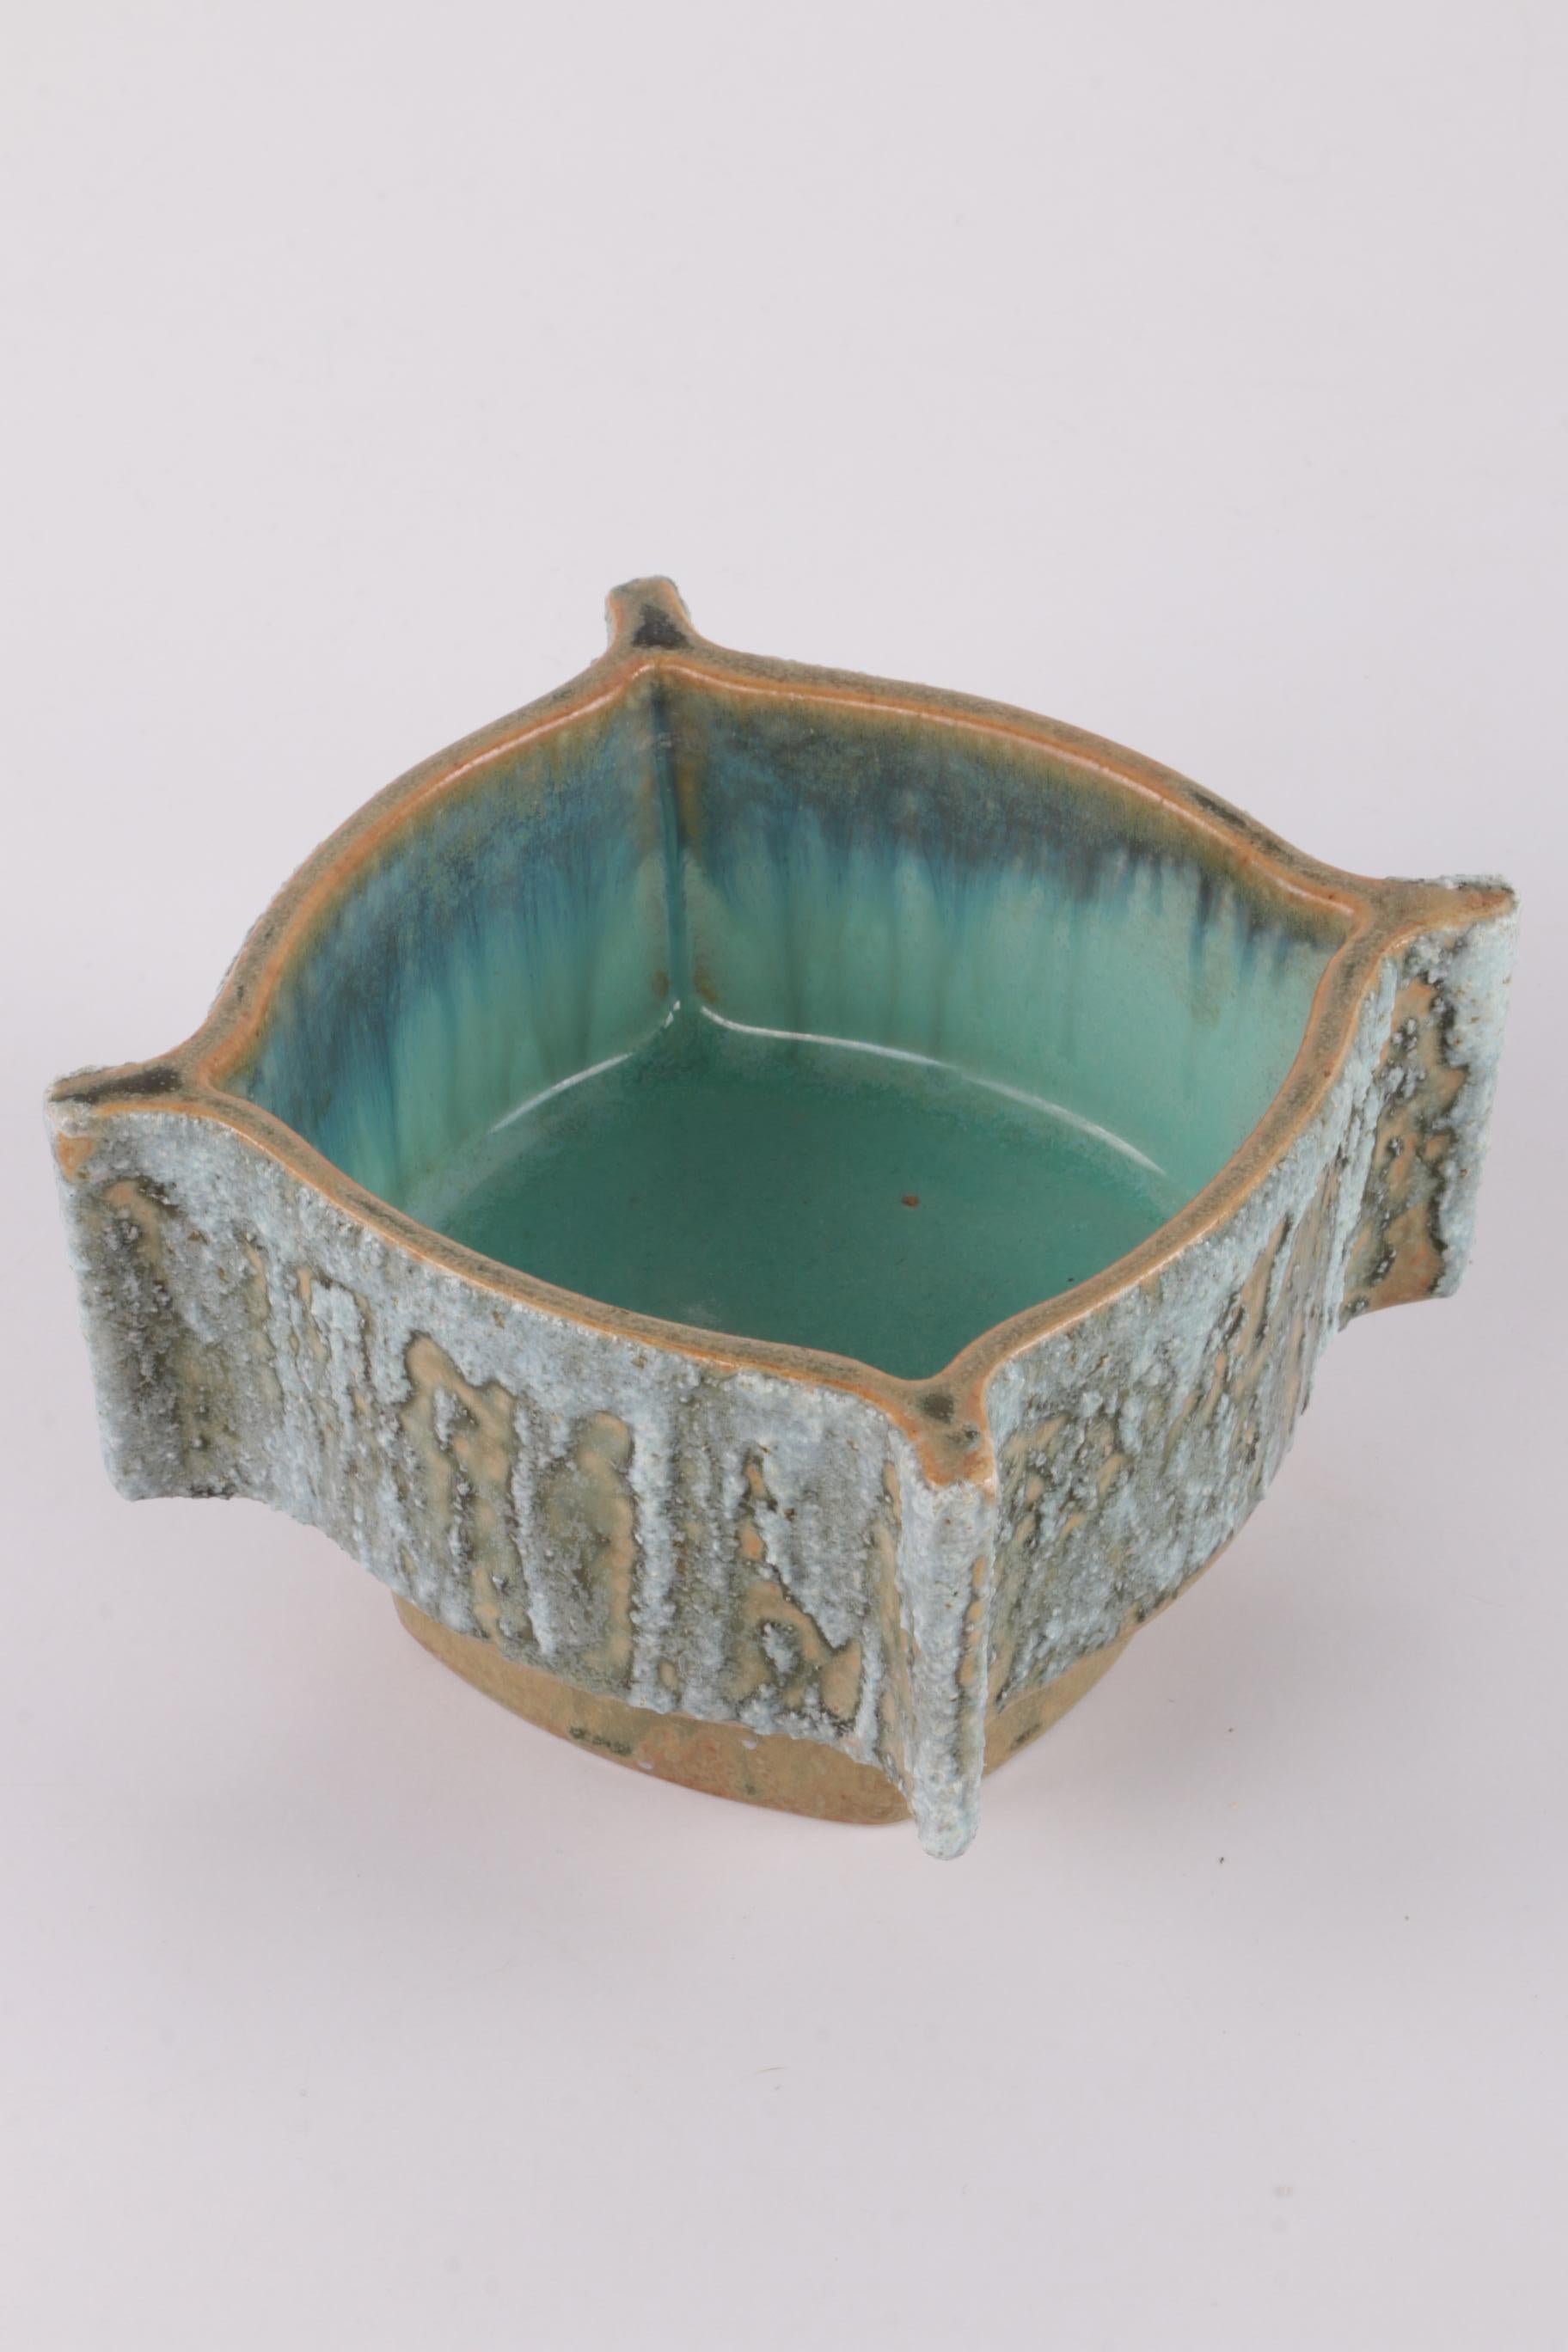 Vintage Yamasan Ikebana bowl beautiful ceramics from Japan 1960s


Vintage Ikebana bowl from Yamasan.

The glaze has a rich light blue color and resembles highly grained tree bark.

Ikebana is the art of Japanese flower arranging and this